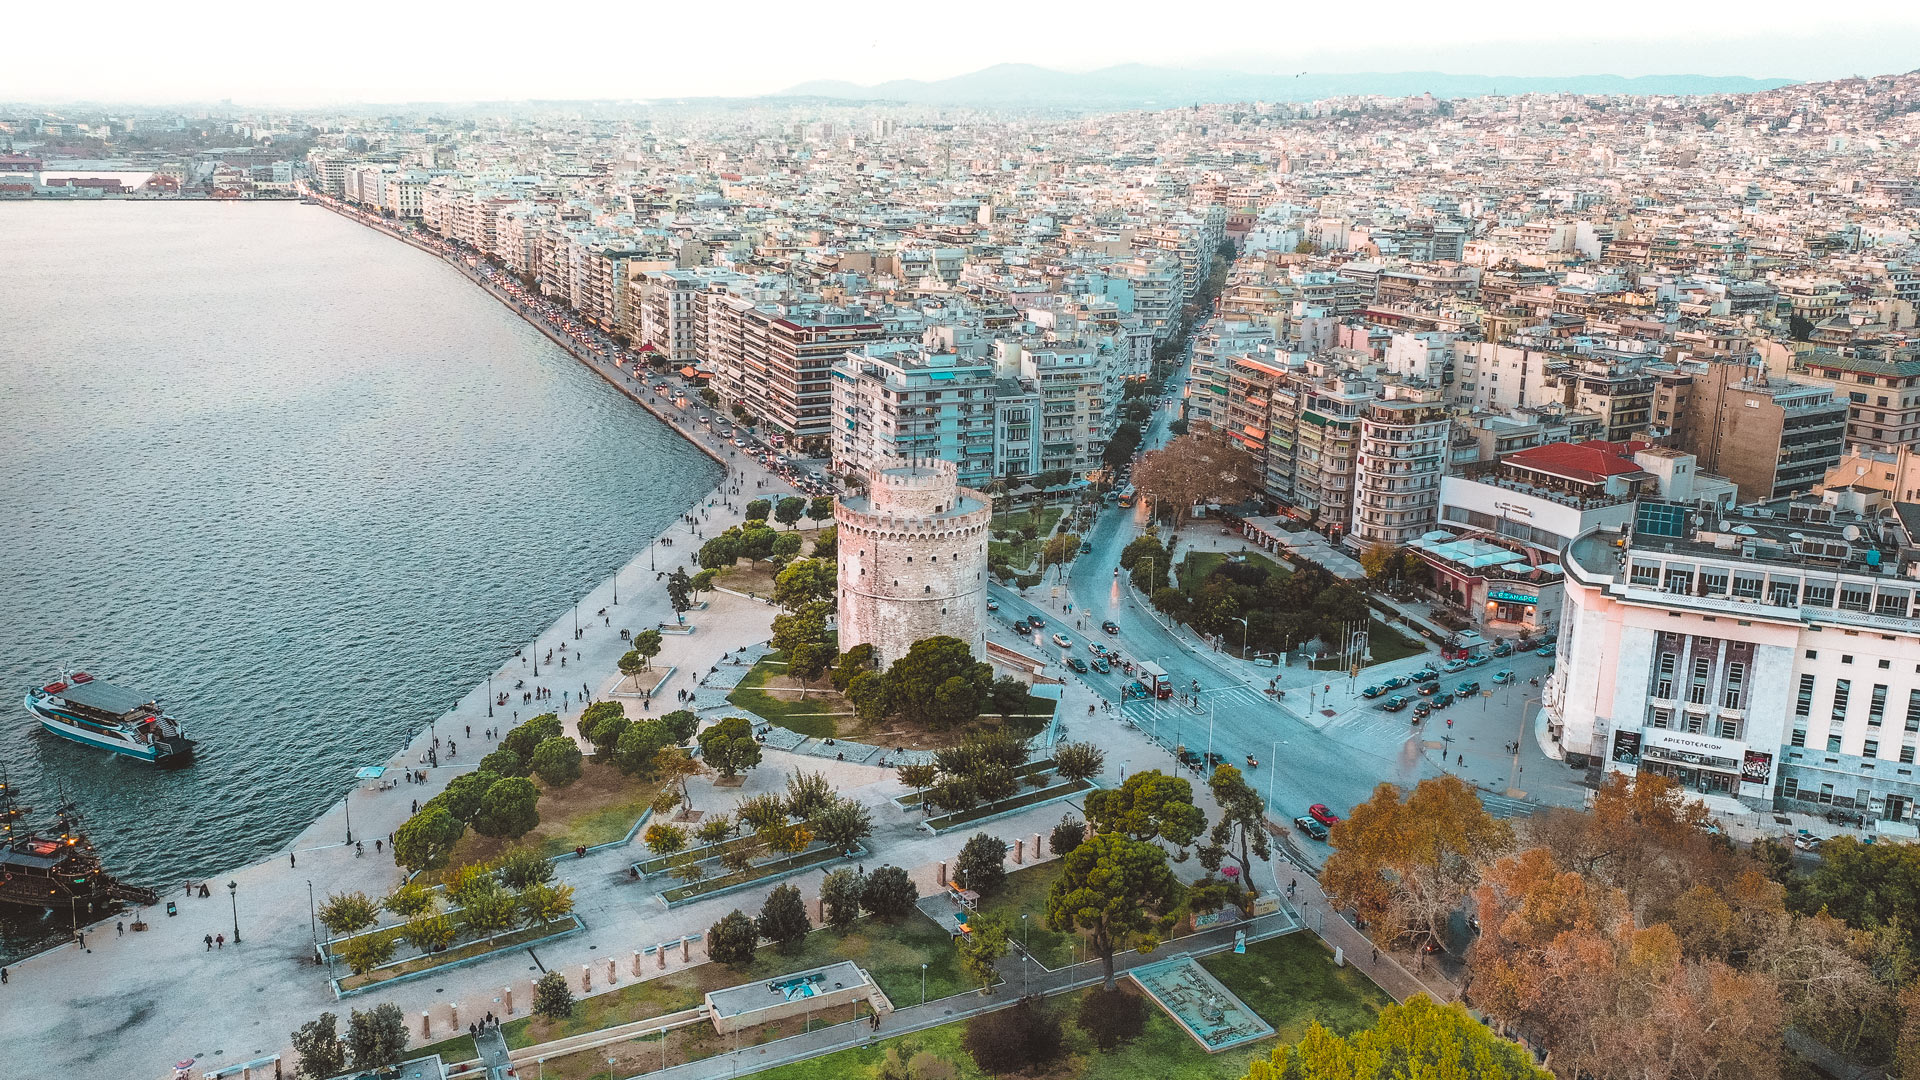 Thessaloniki and the White Tower from above